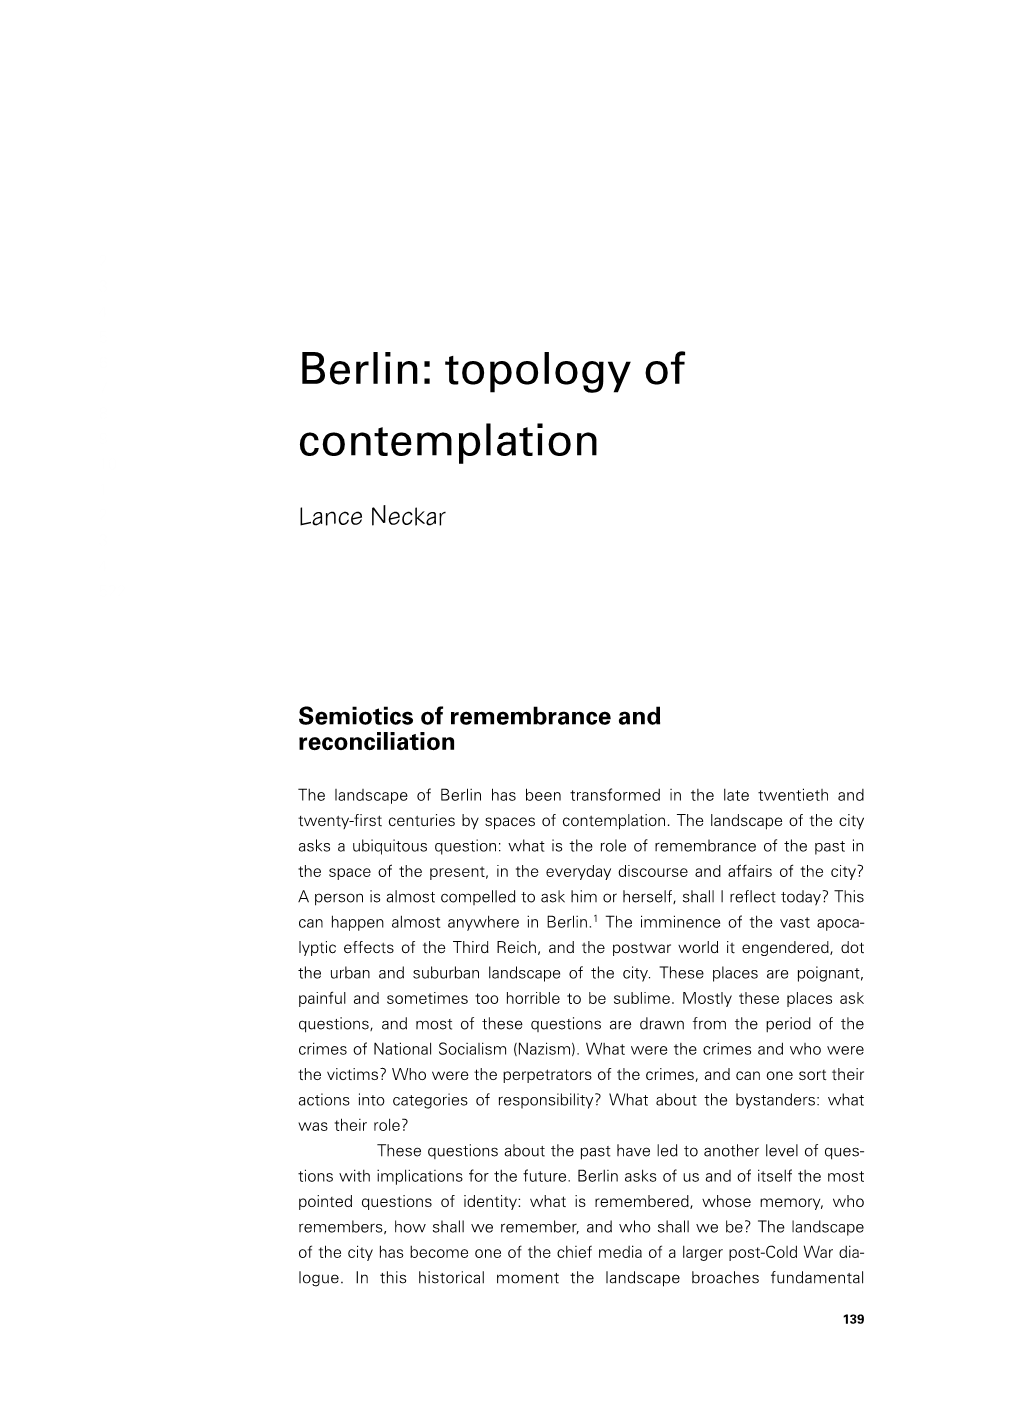 Berlin: Topology of Contemplation